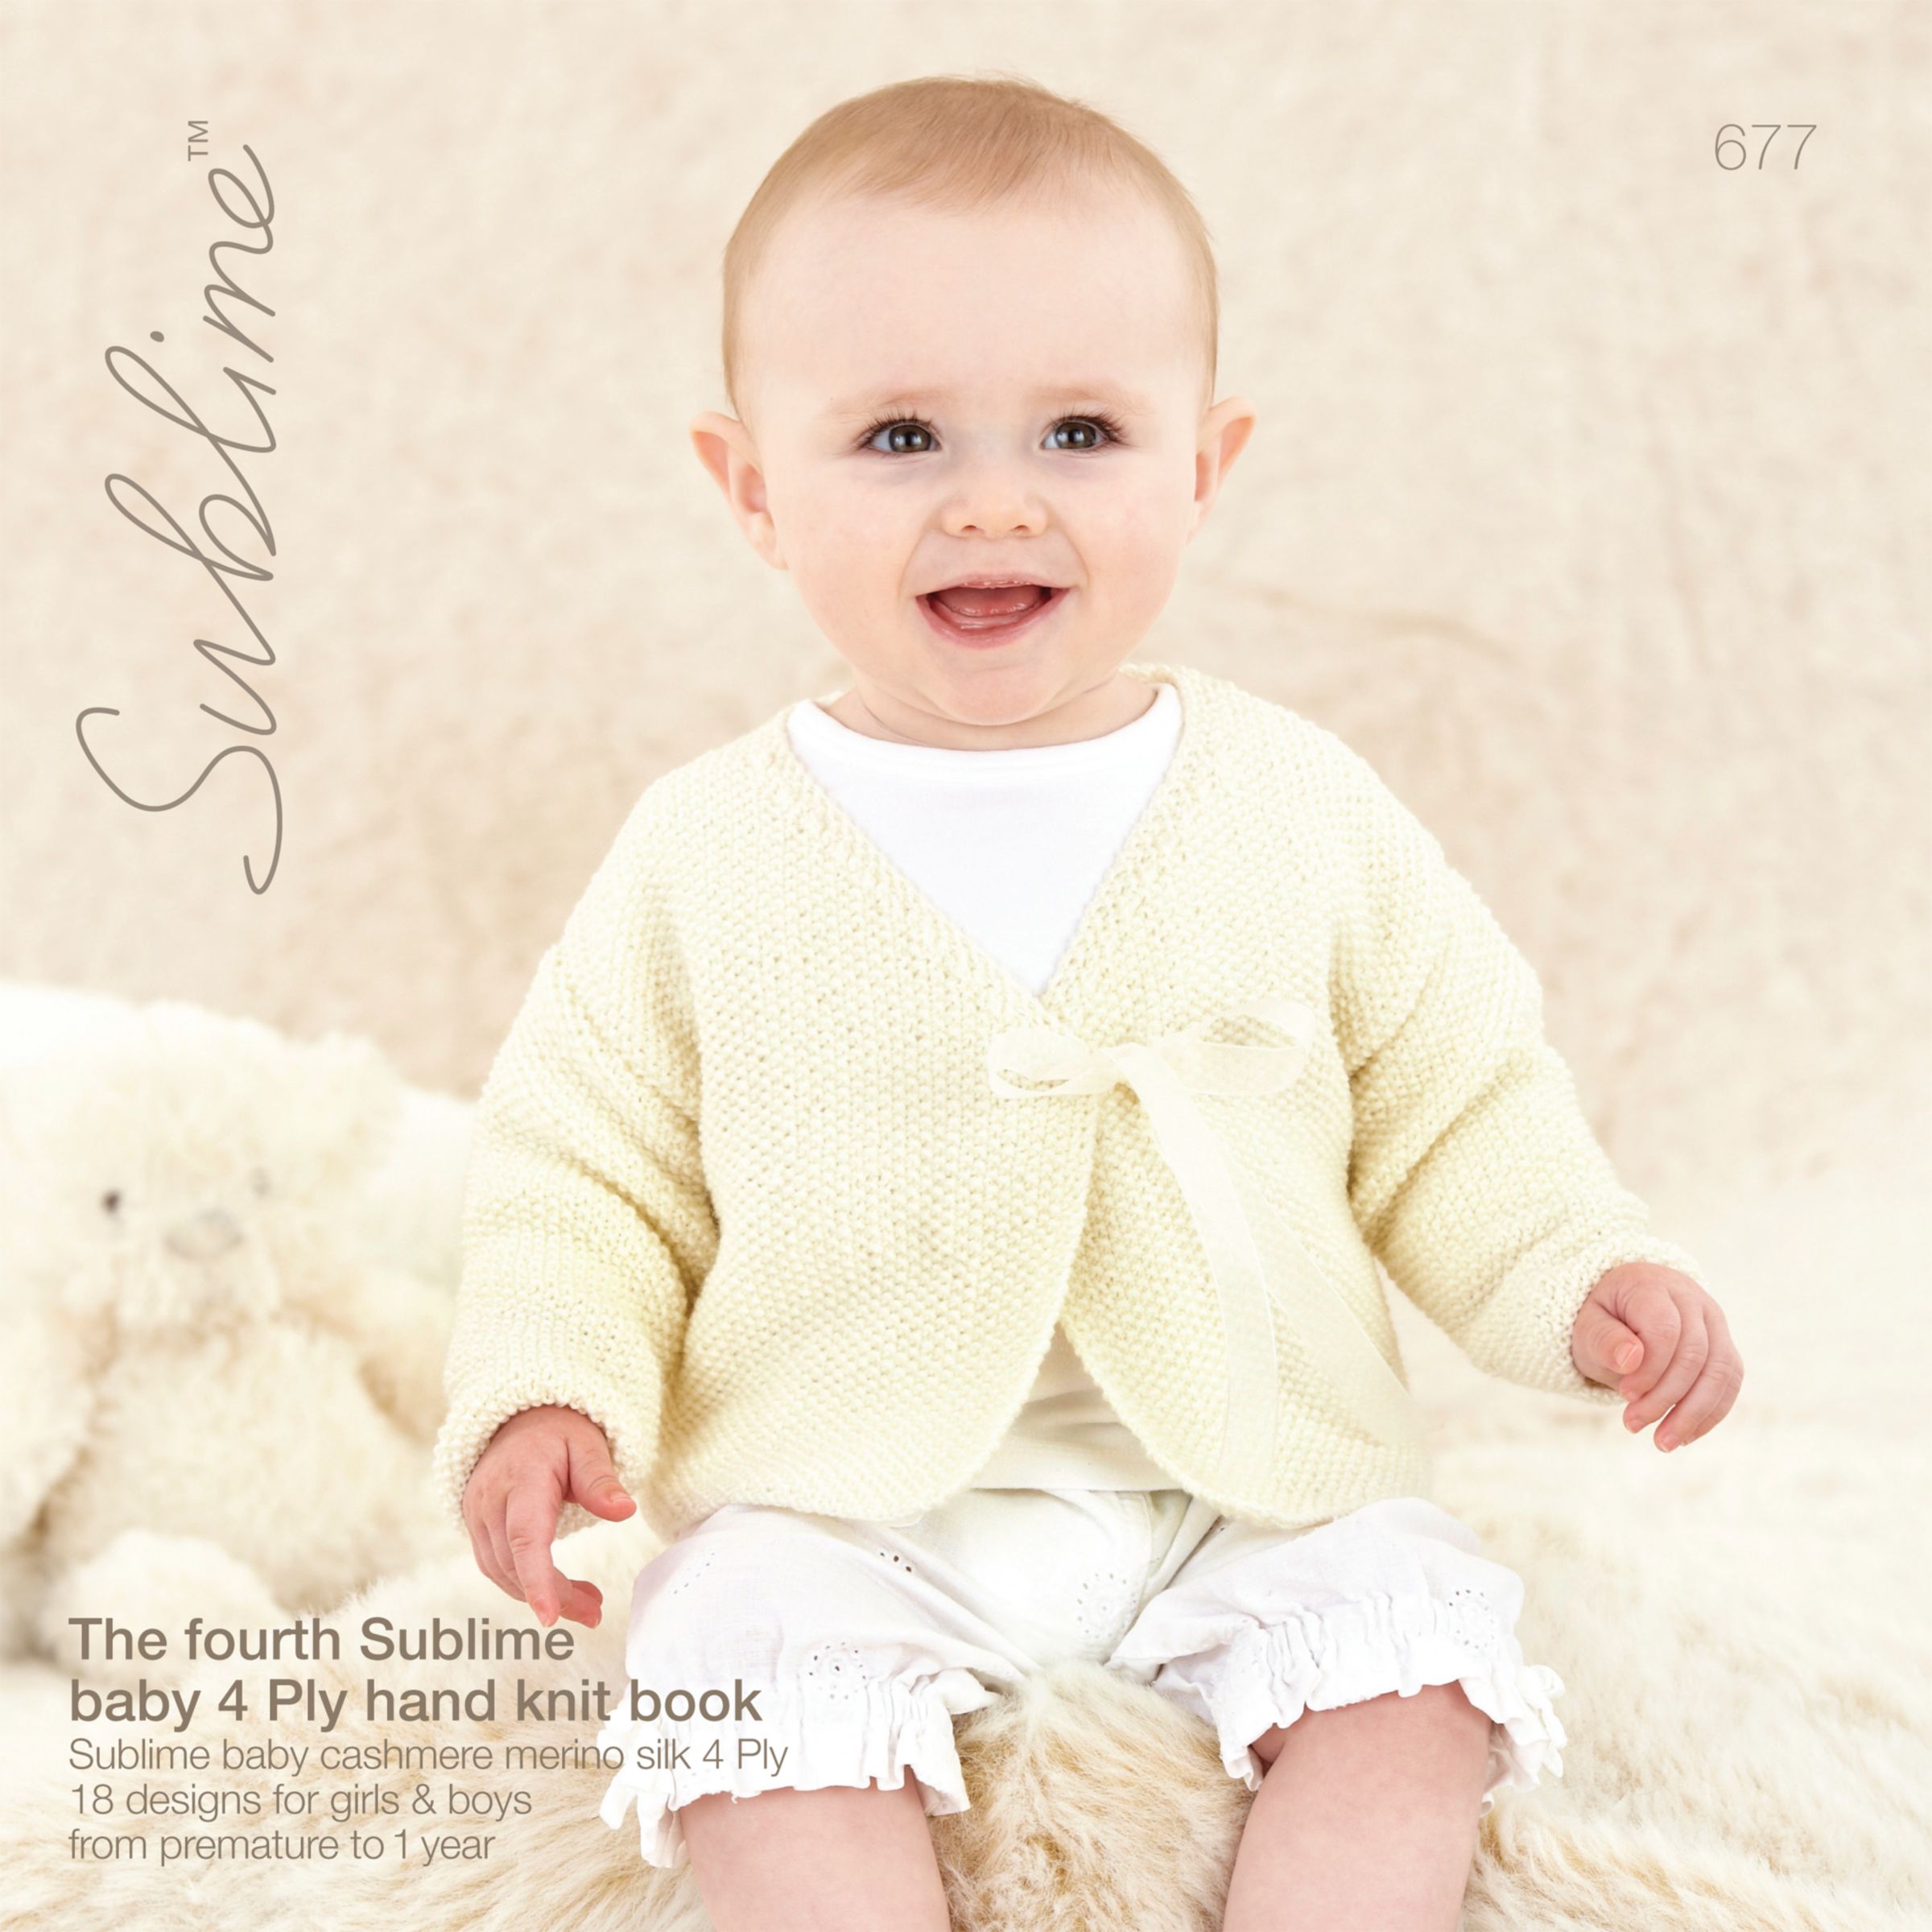 Sirdar Sublime Baby 4 Ply Hand Knit Knitting Patterns Book